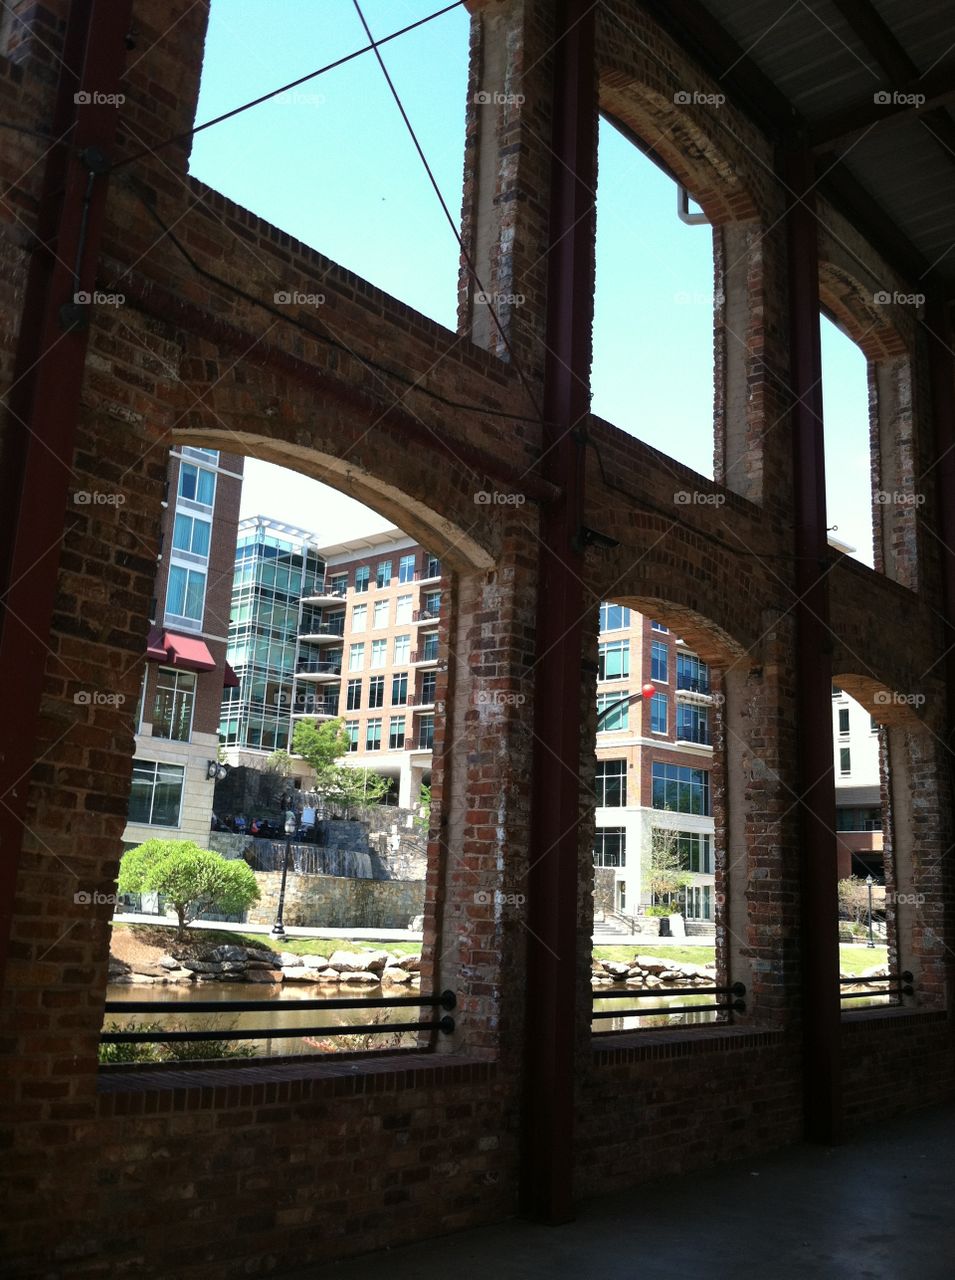 Arched windows of a historic brick building silhouetted against a modern city scene.